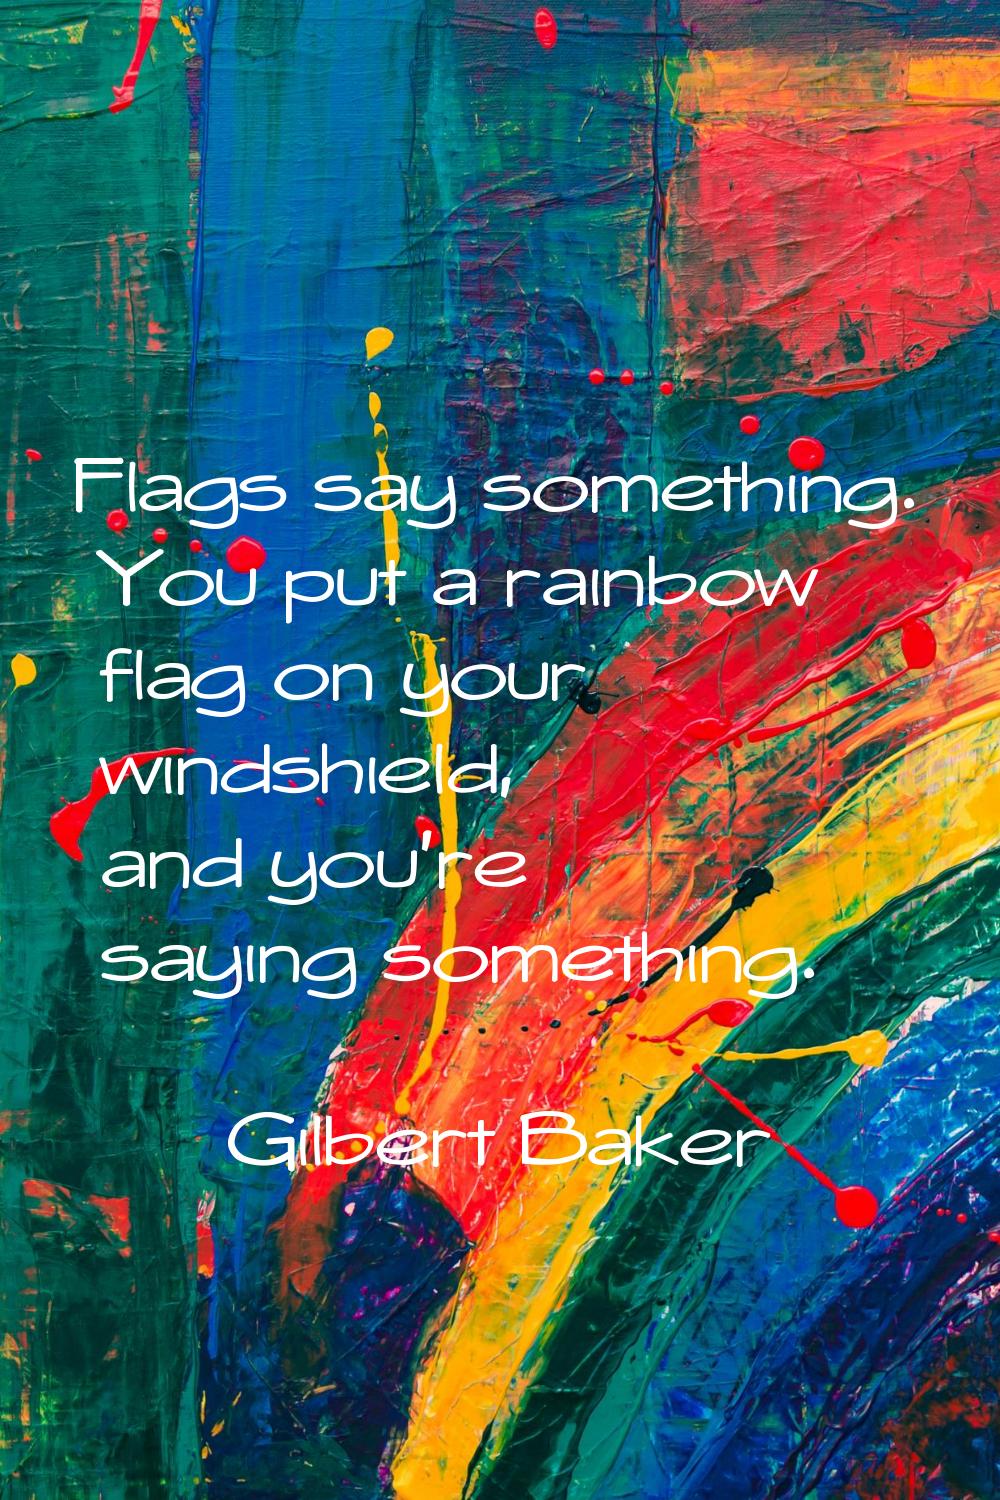 Flags say something. You put a rainbow flag on your windshield, and you're saying something.